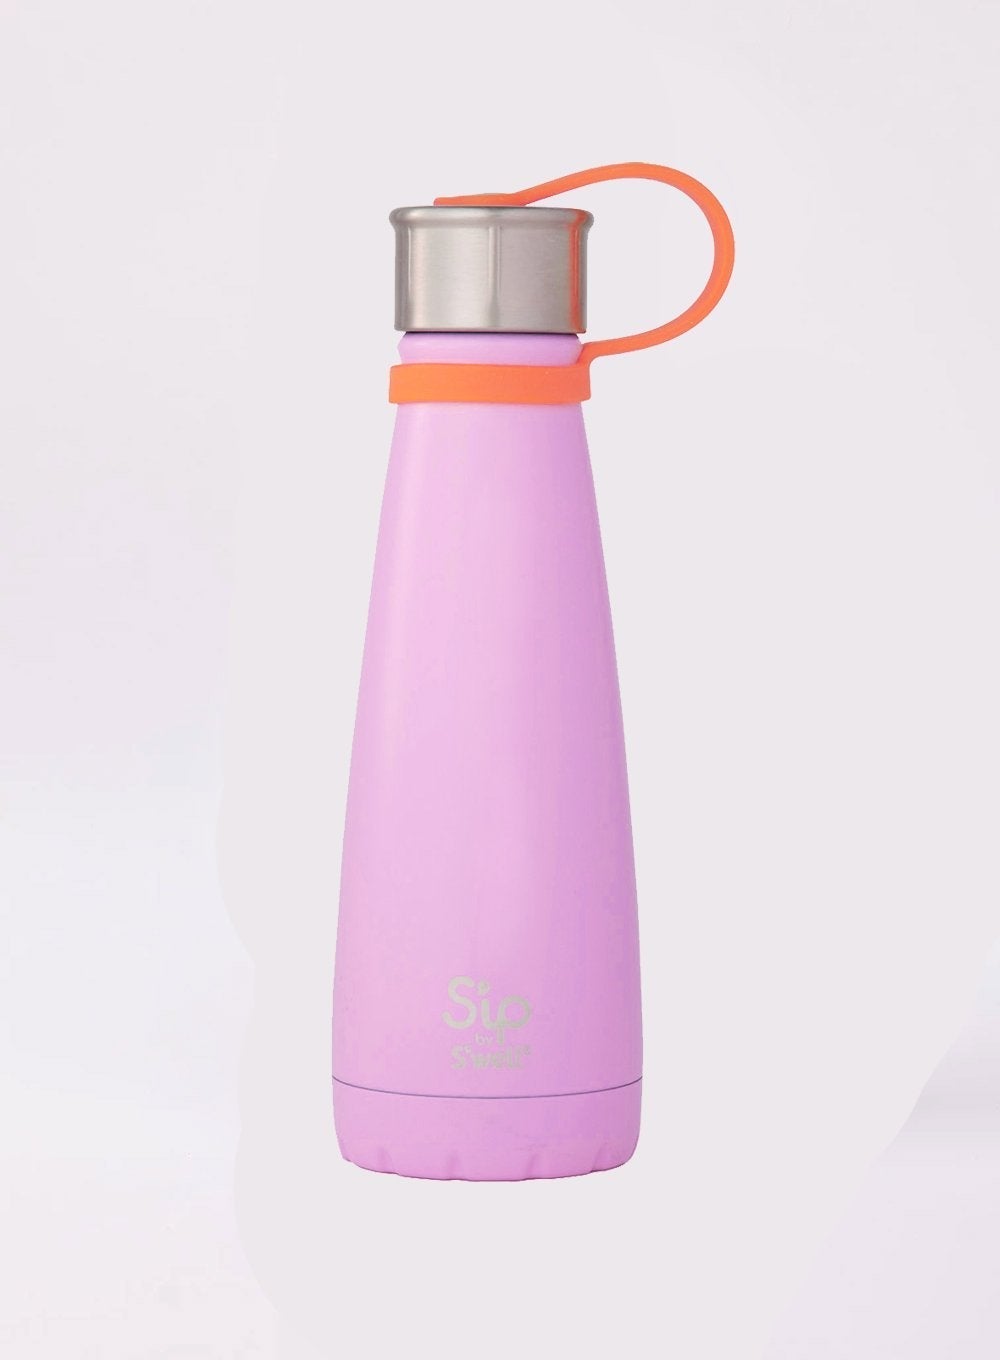 Sip by Swell Bottle Sip by Swell Insulated Water Bottle in Pink Punch